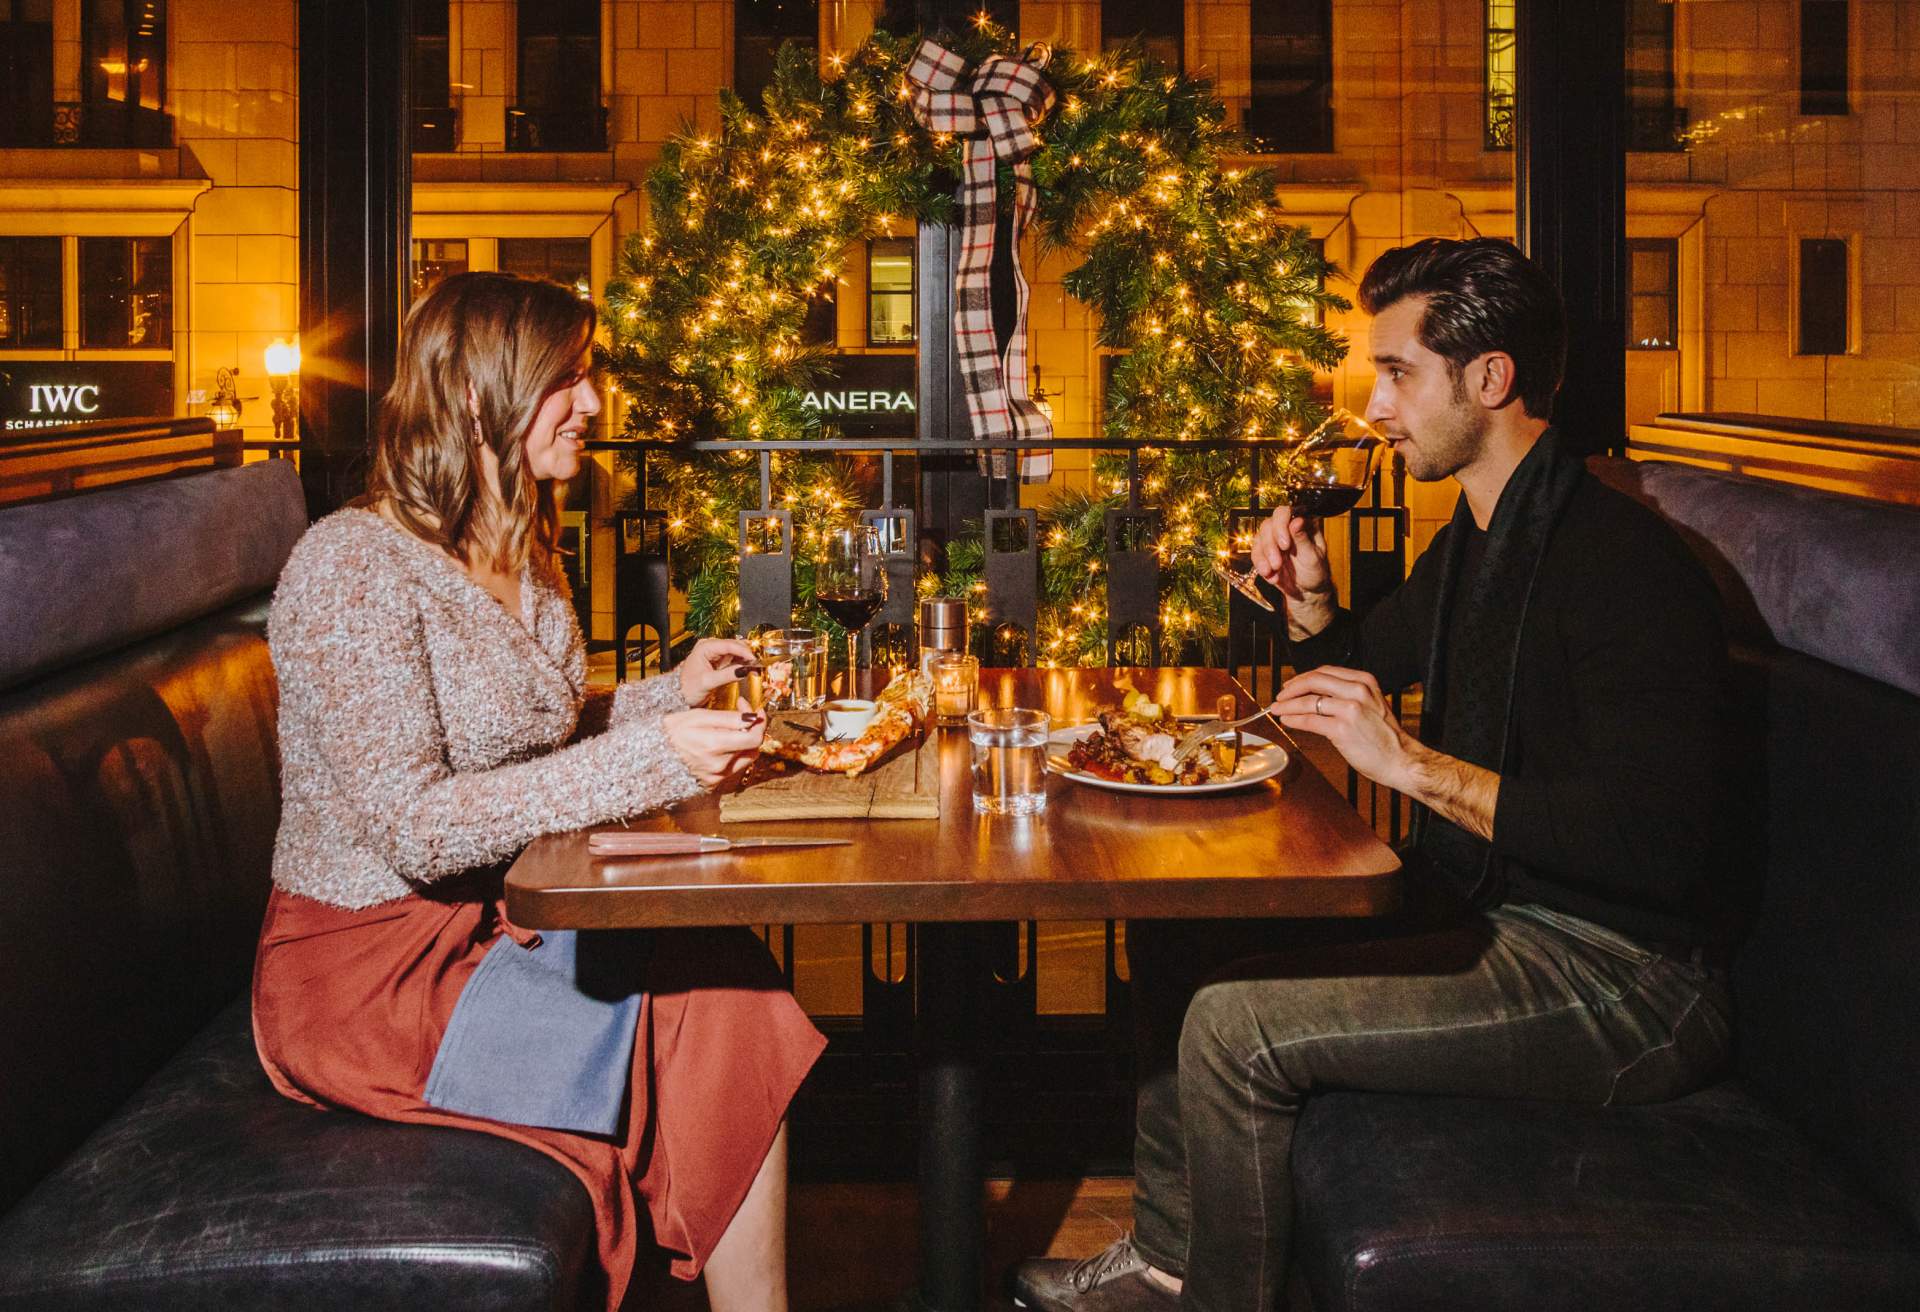 Image depicts two people sharing dinner during the holiday season. They are both drinking wine and are seated in a restaurant booth next to a large window. There is a large wreath with a plaid bow hanging behind them.